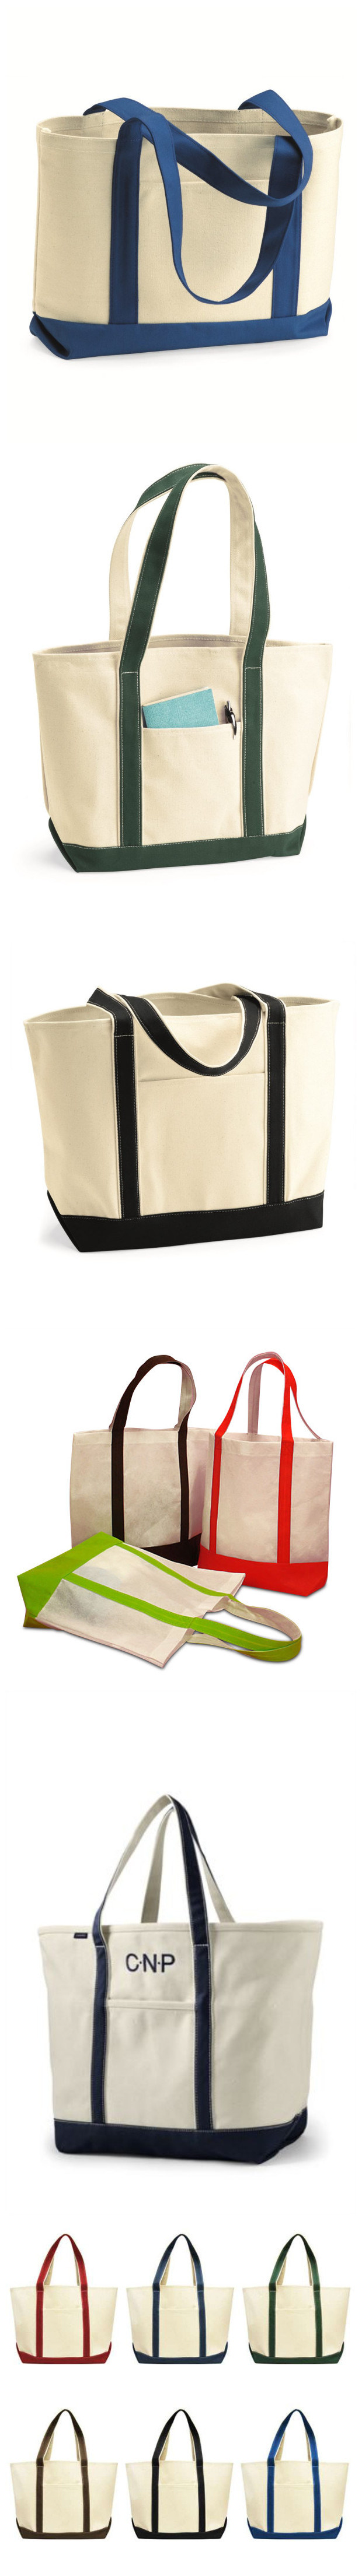 OEM Simple Canvas Bag/Canvas Shopping Bag/Cotton Canvas Tote Bag with Strong Handle